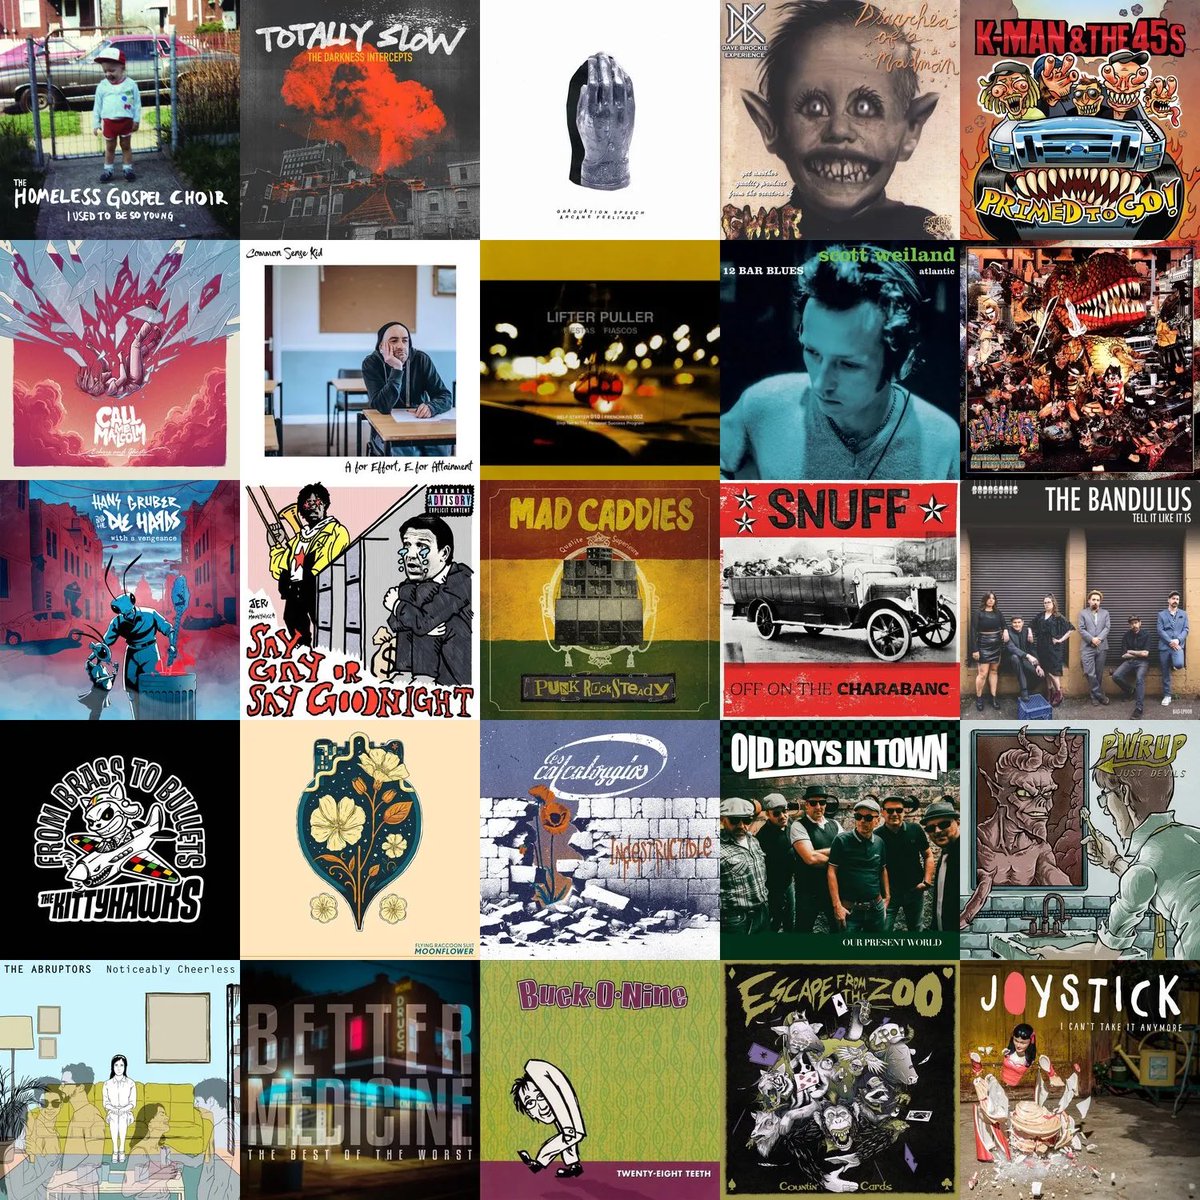 It’s Friday and you know what that means. This week’s music 5x5!